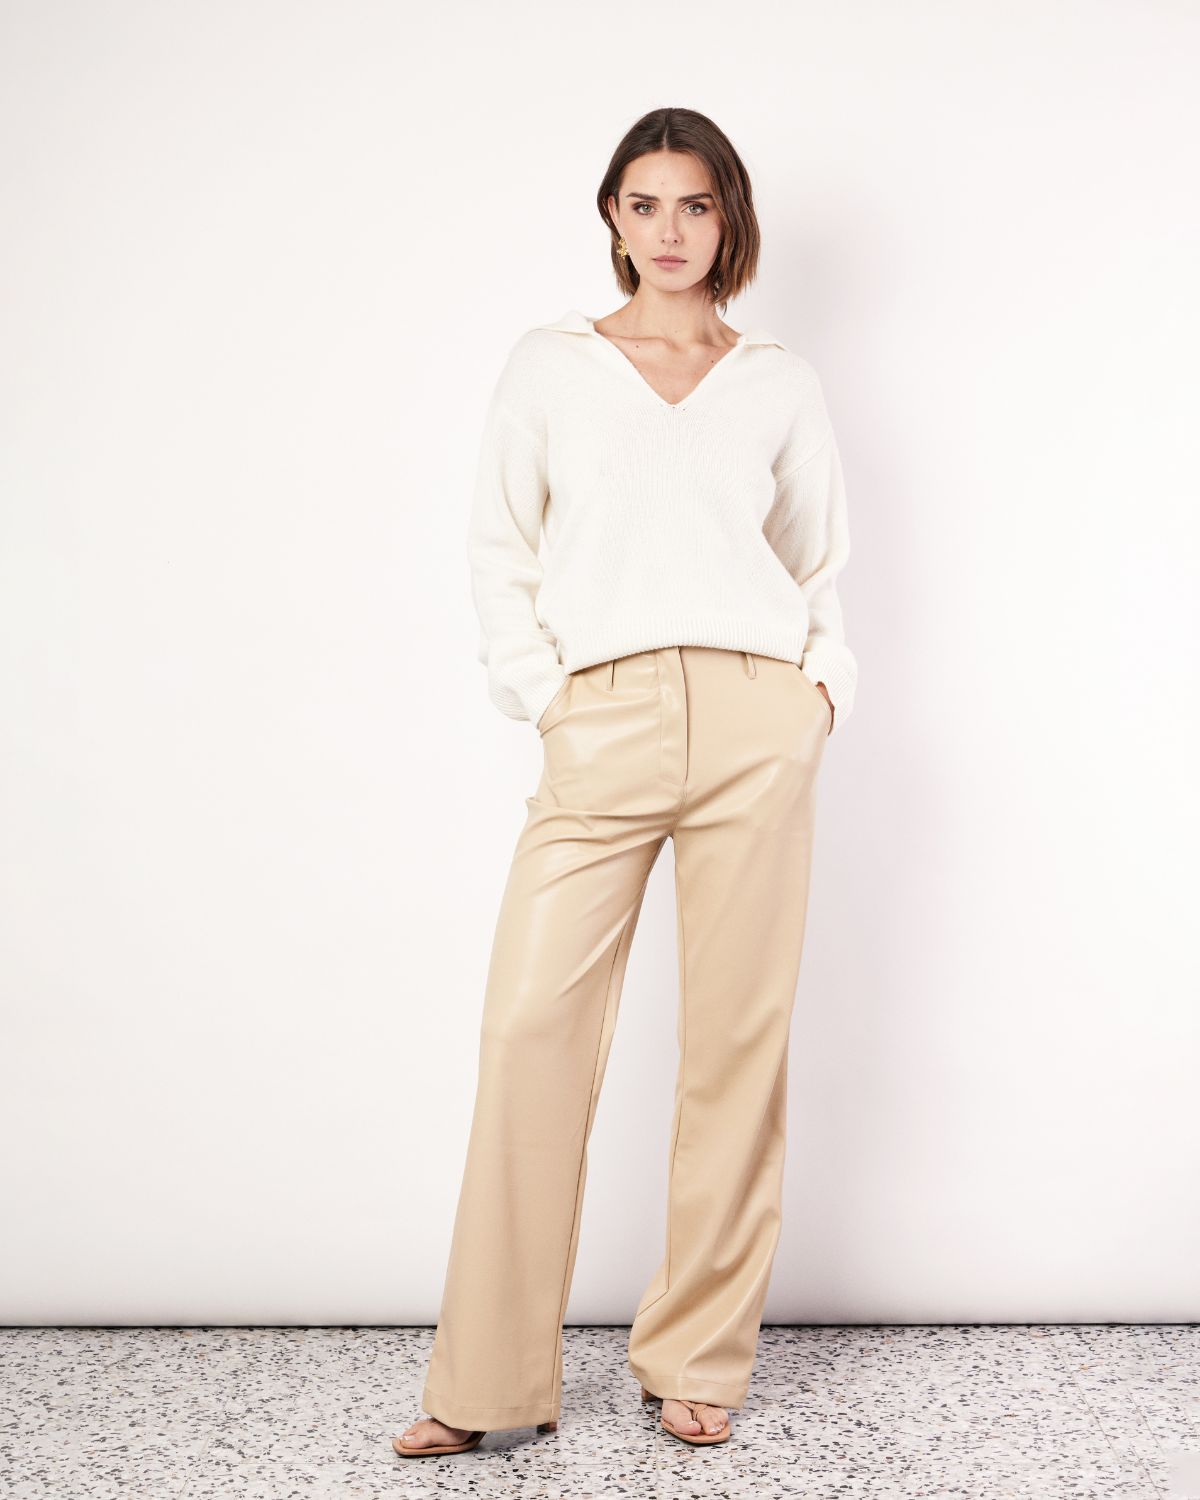 The Vegan Leather Pant are a mid-rise straight leg pant, featuring pockets, belt loops and a hidden clasp closure. They are crafted from a buttery soft Vegan Leather fabrication in Tan. Now available at Romy. 